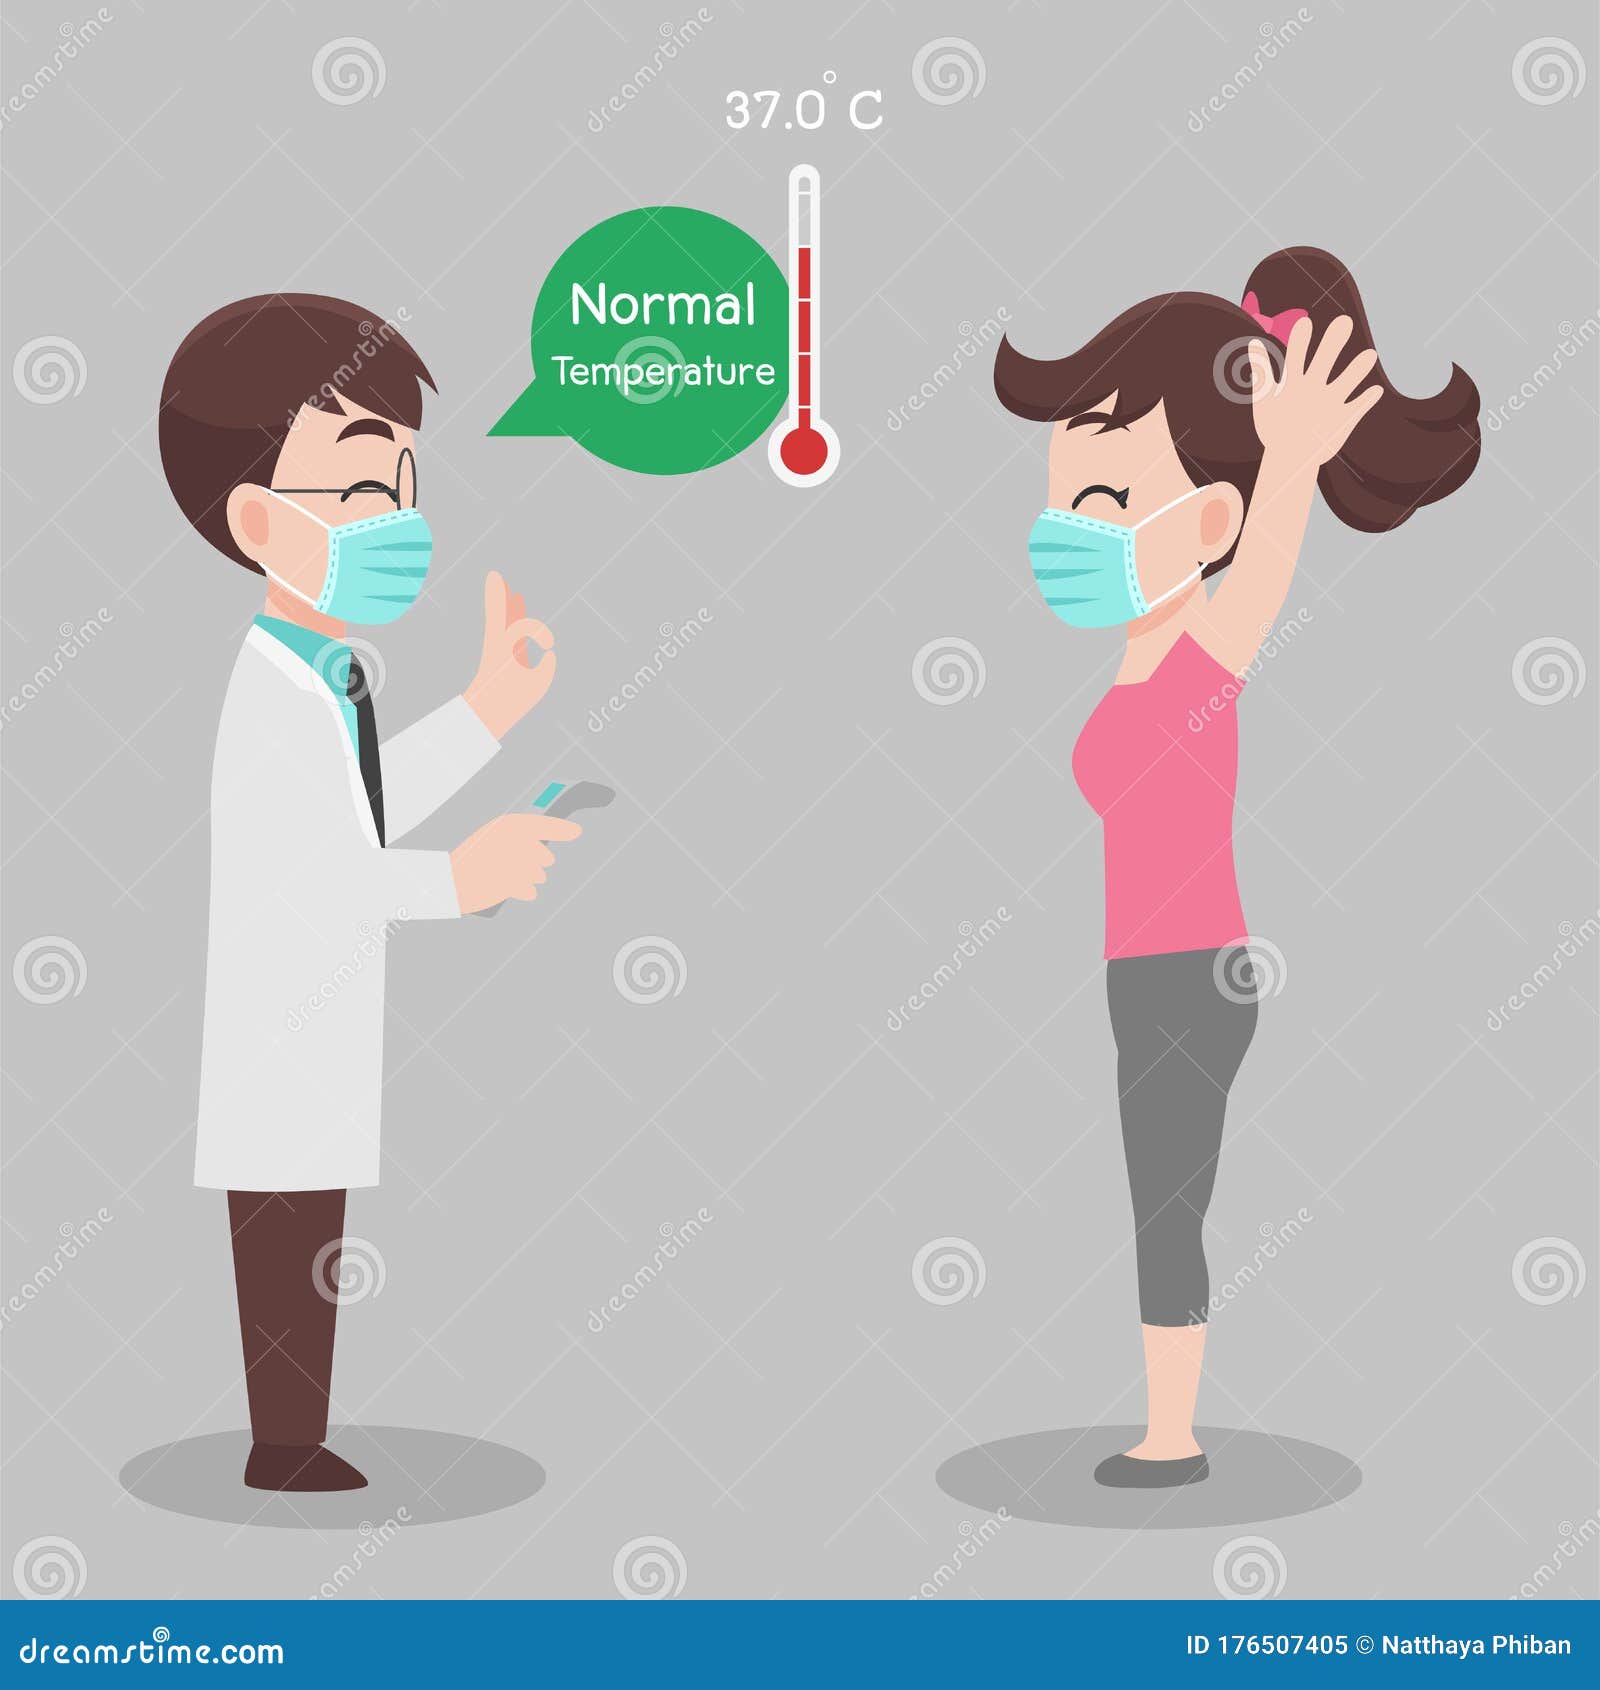 woman see doctor for check herself, temperature for corona virus scanning, she is not infect, results is normal temperature